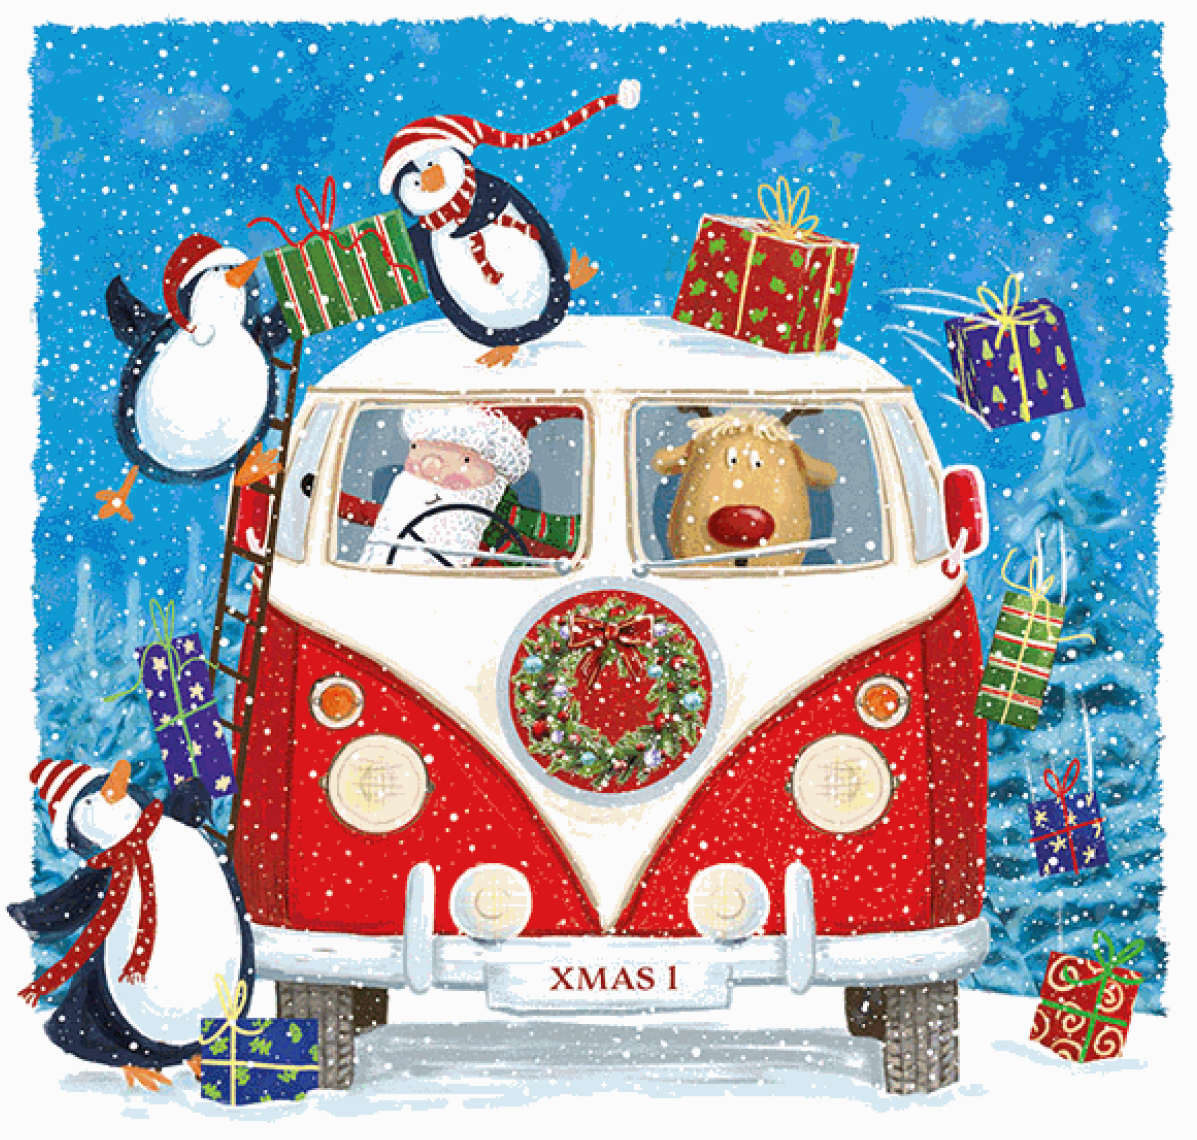 P-P-P Pass the Presents - Christmas Card (10 pack)